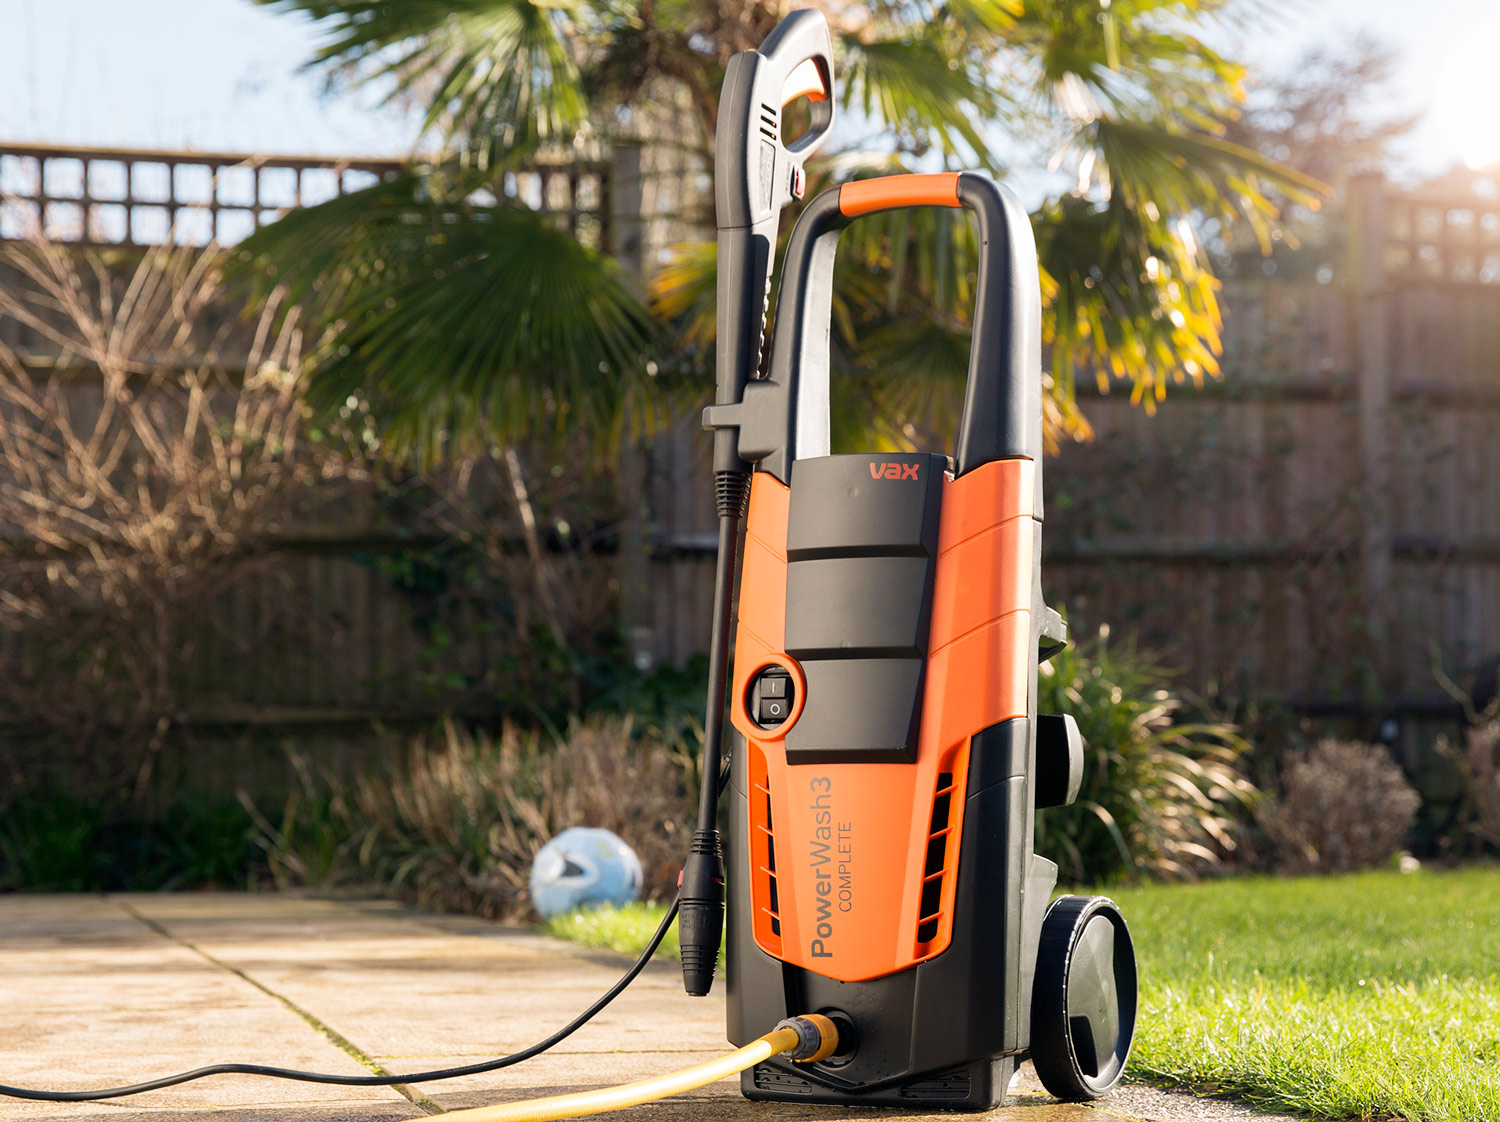 Vax PowerWash 2500W Complete pressure washer review by The Sunday Times Driving